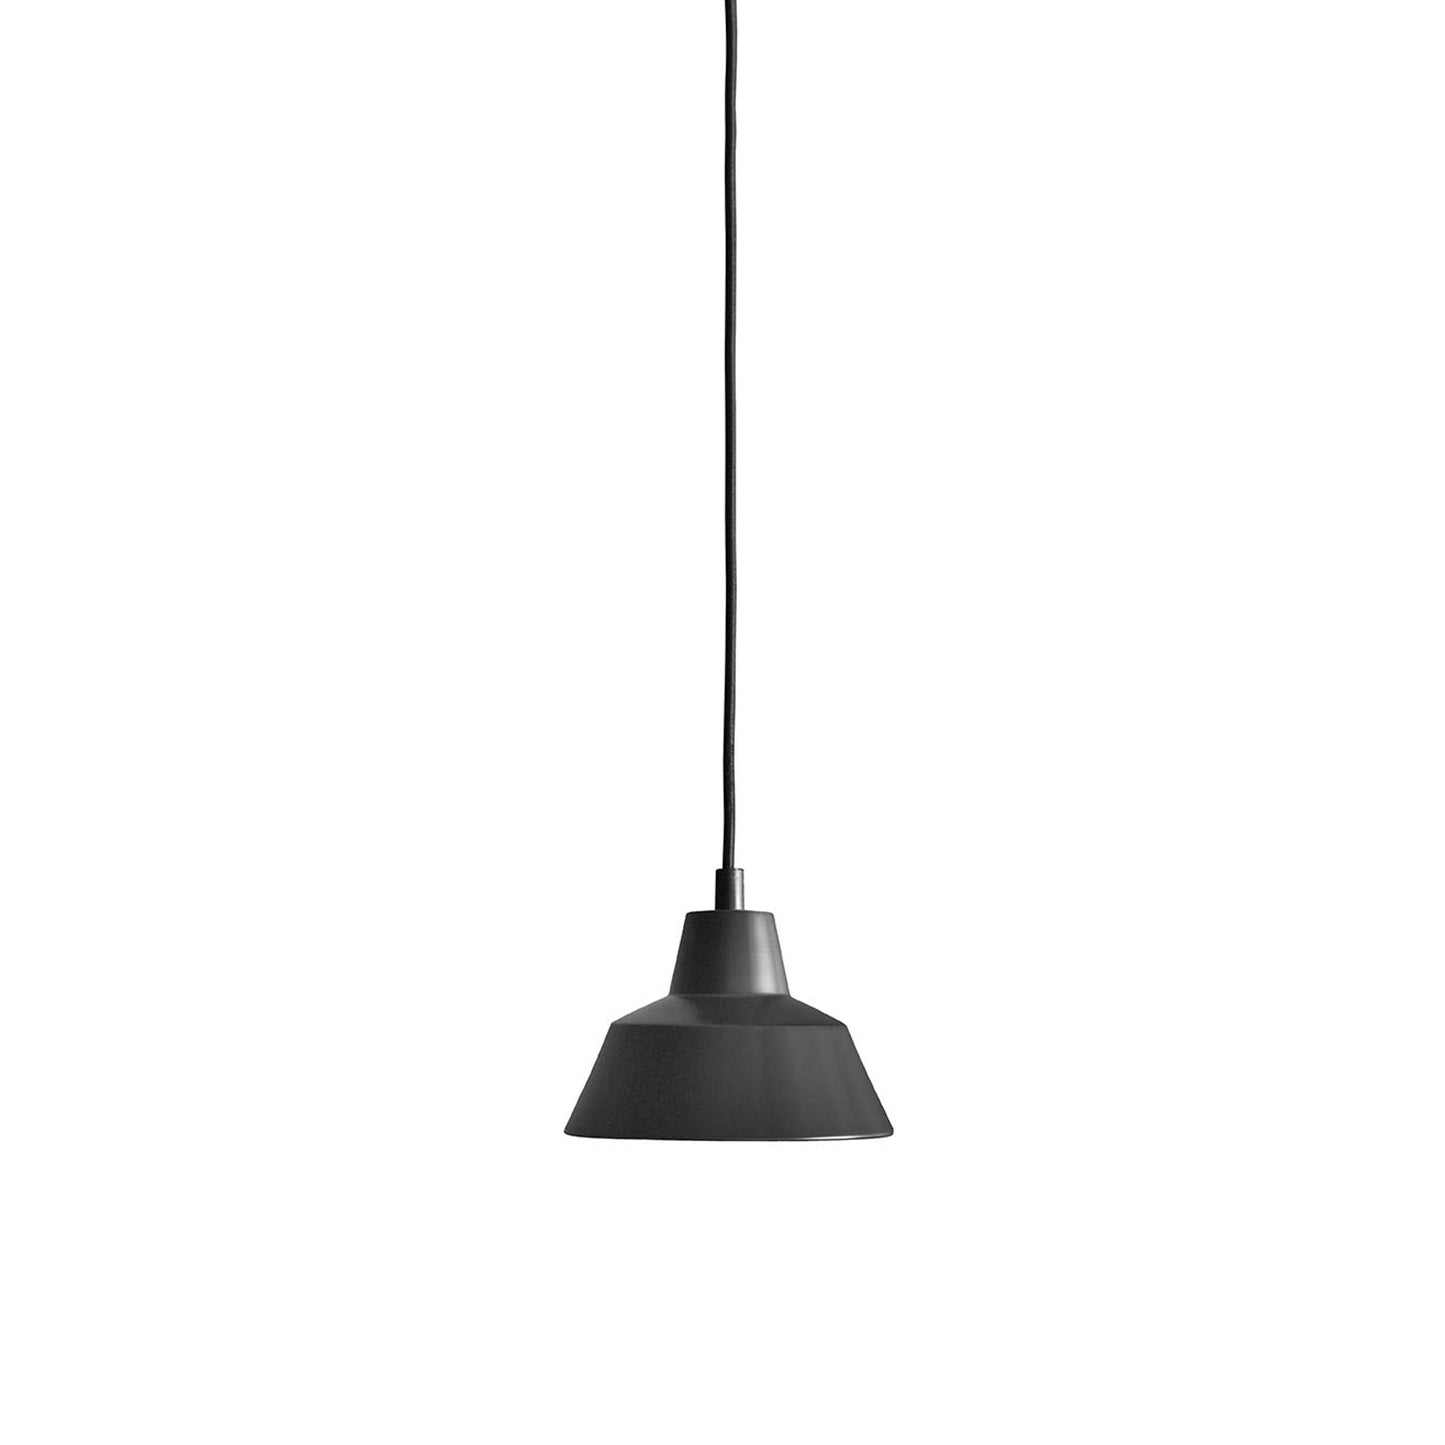 Workshop Lamp Pendant Lamp W1 by Made By Hand #Mat Black